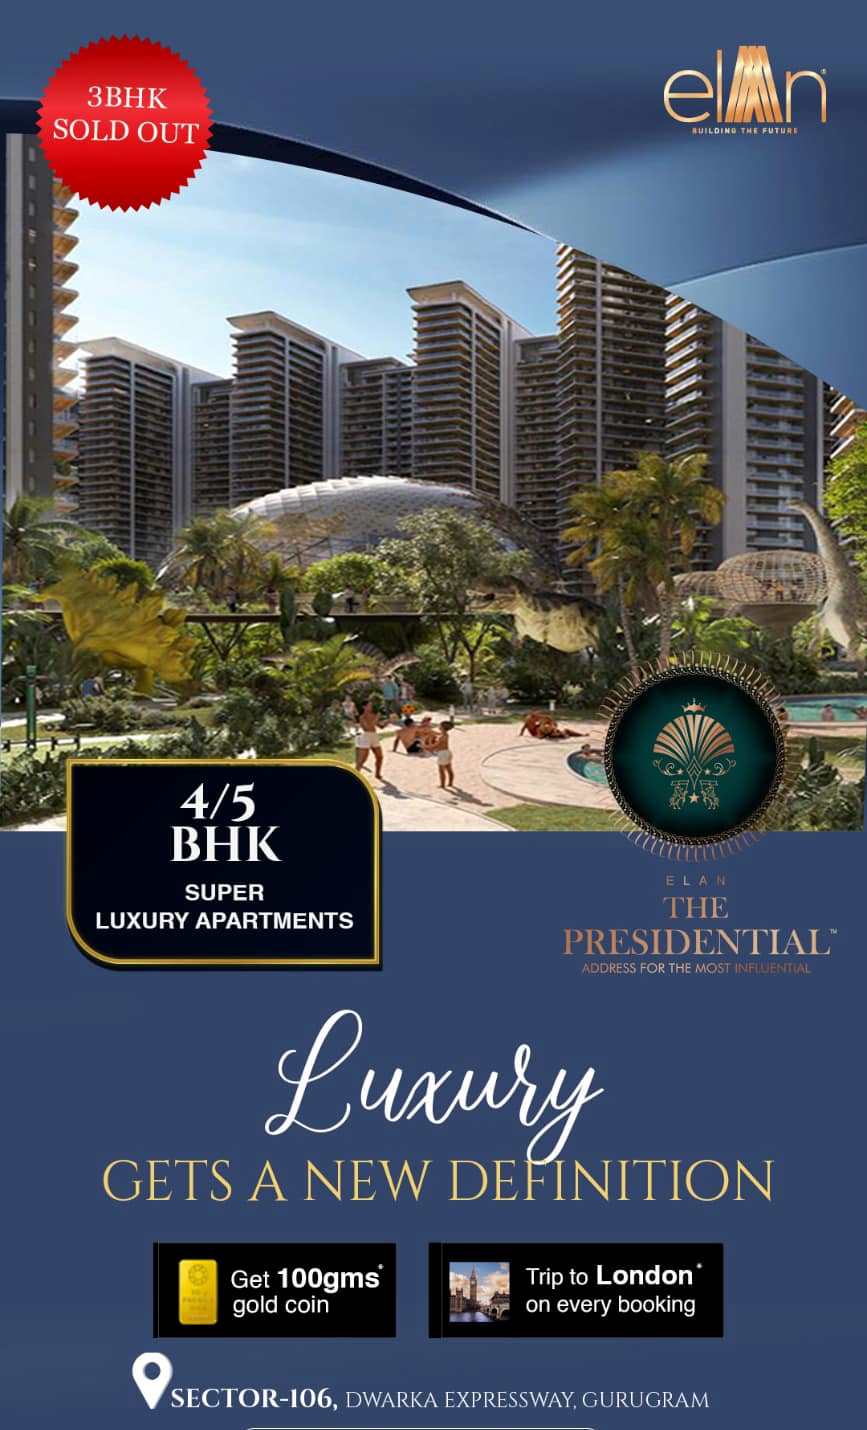 The epitome of high-class living transforms your everyday into something special. Resort-Style Apartments at Elan The Presidential, Gurgaon Update